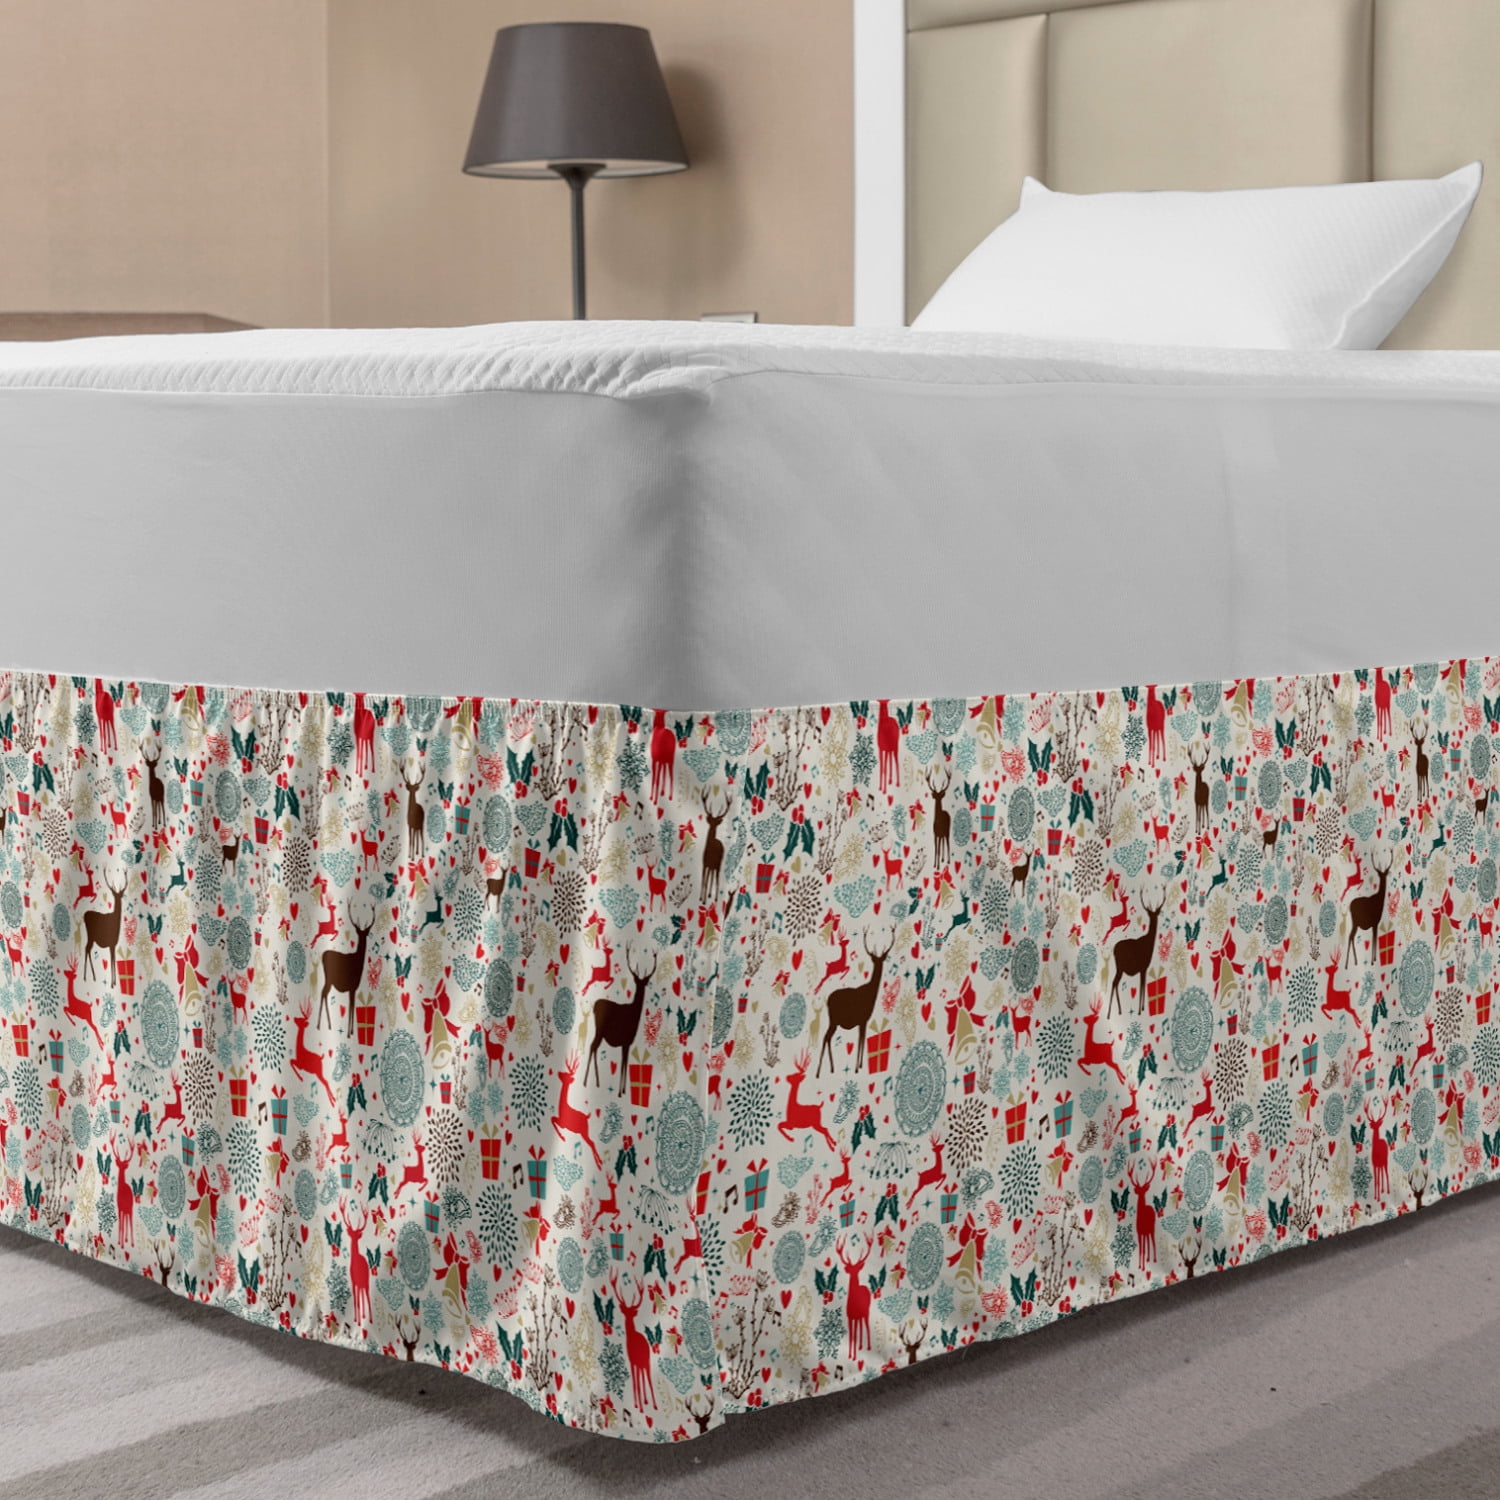 Multi-layer Ruffled Bed skirt Four-layer  pleated elastic bed skirt Bed Valance* 